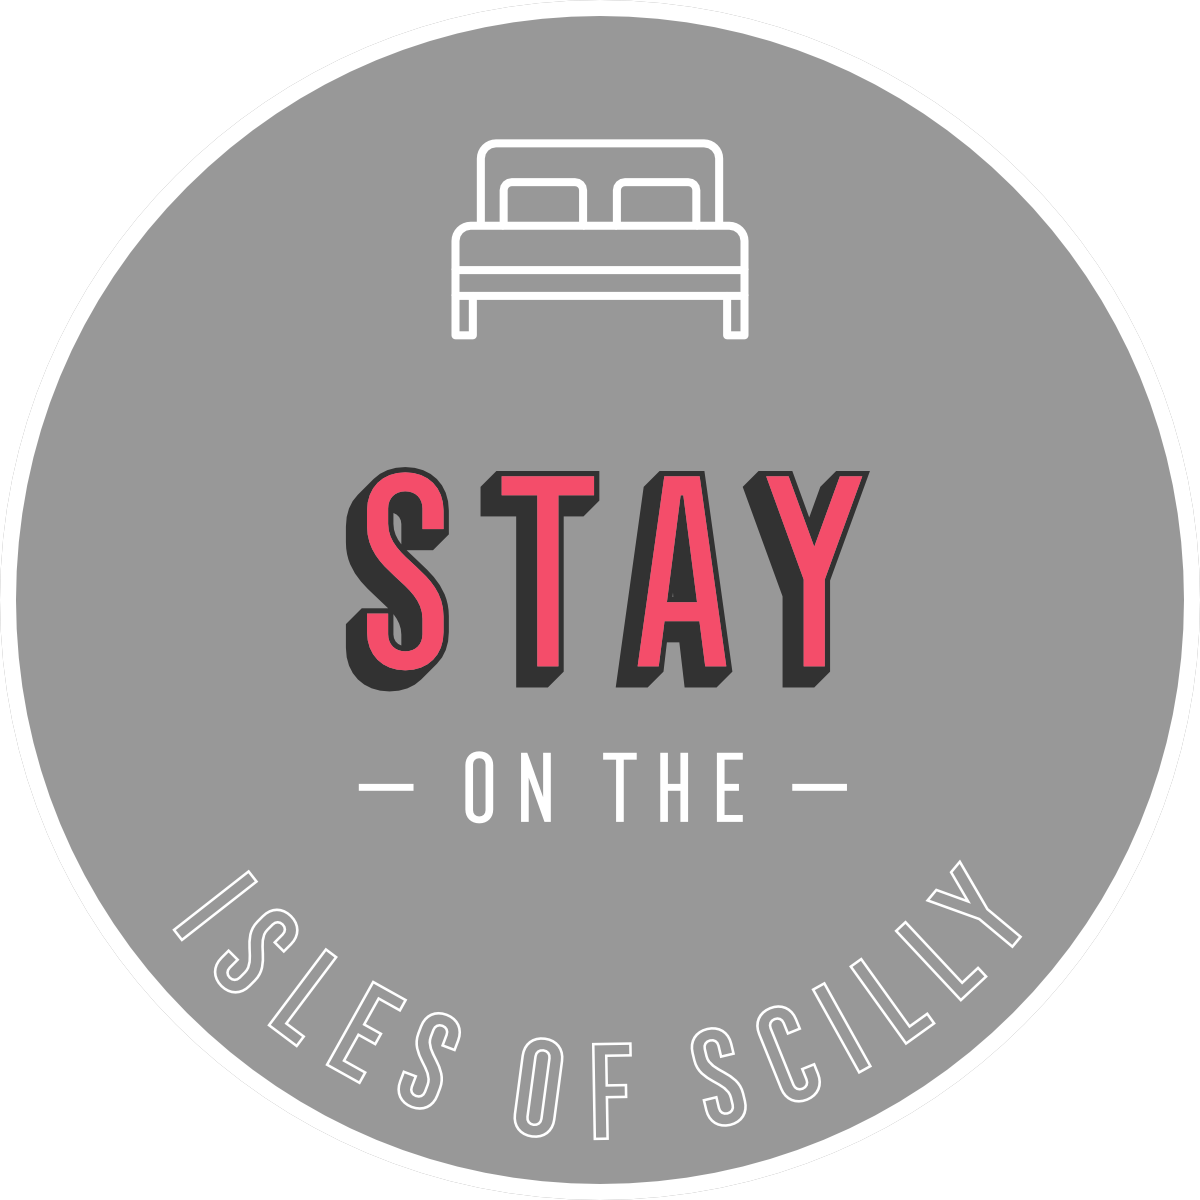 Stay on the Isles of Scilly